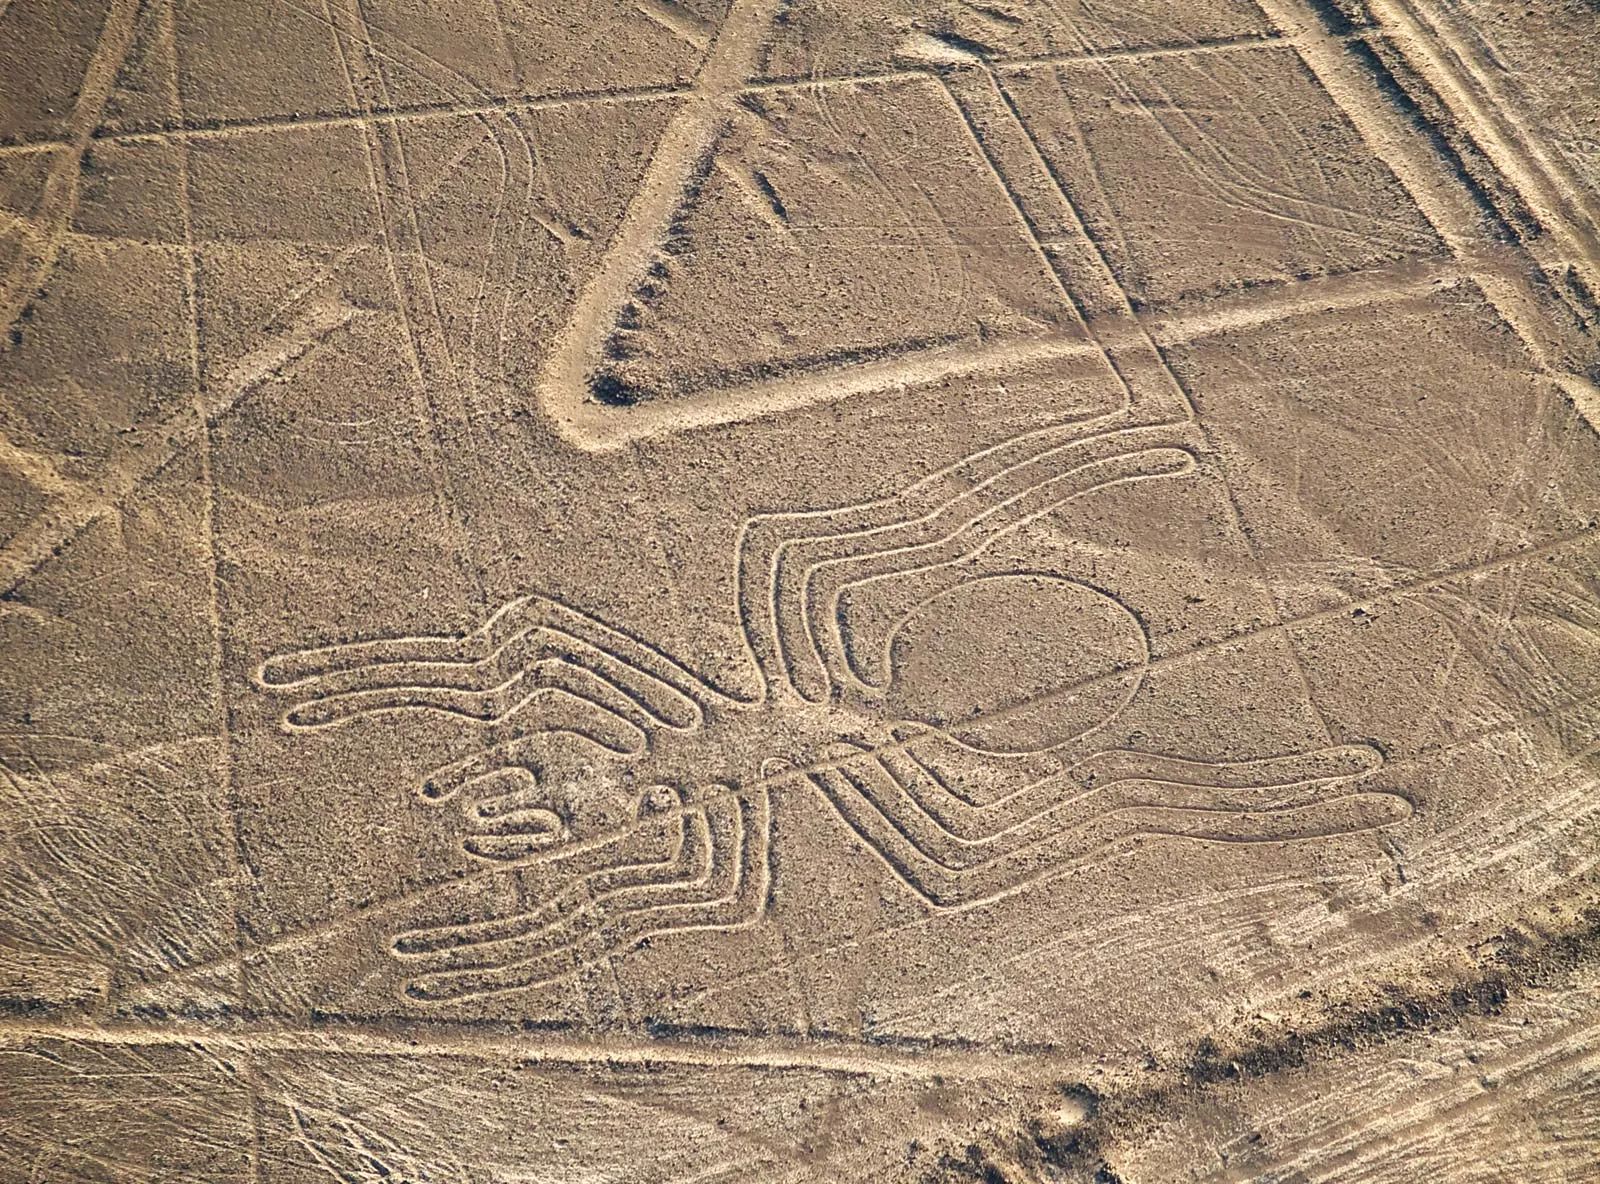 Unearthing the Nazca Lines: Ancient Geoglyphs and Extraterrestrial Theories
